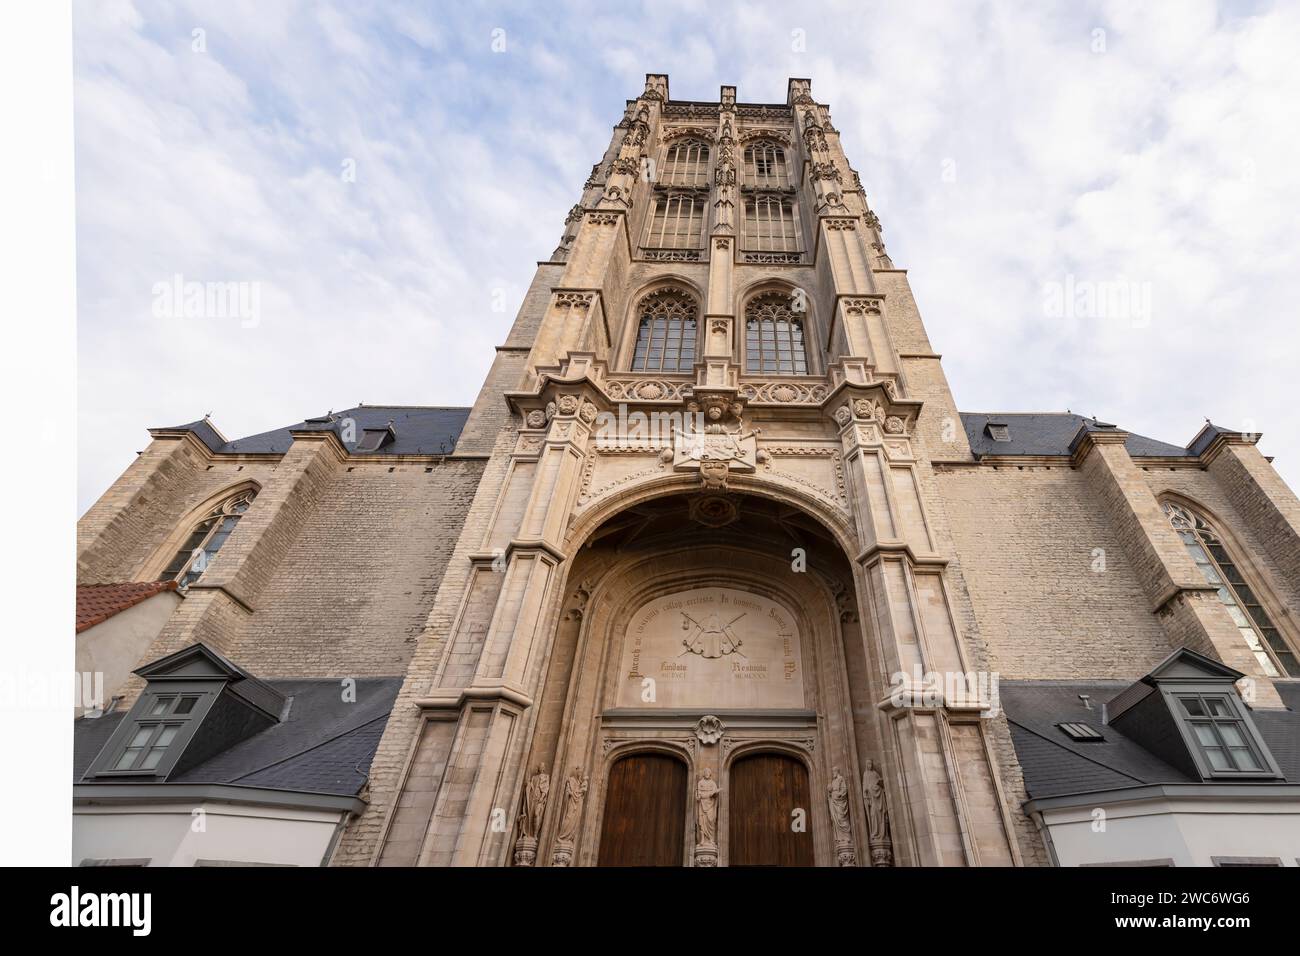 Facade of the St. James Church in the city of Antwerp. Stock Photo